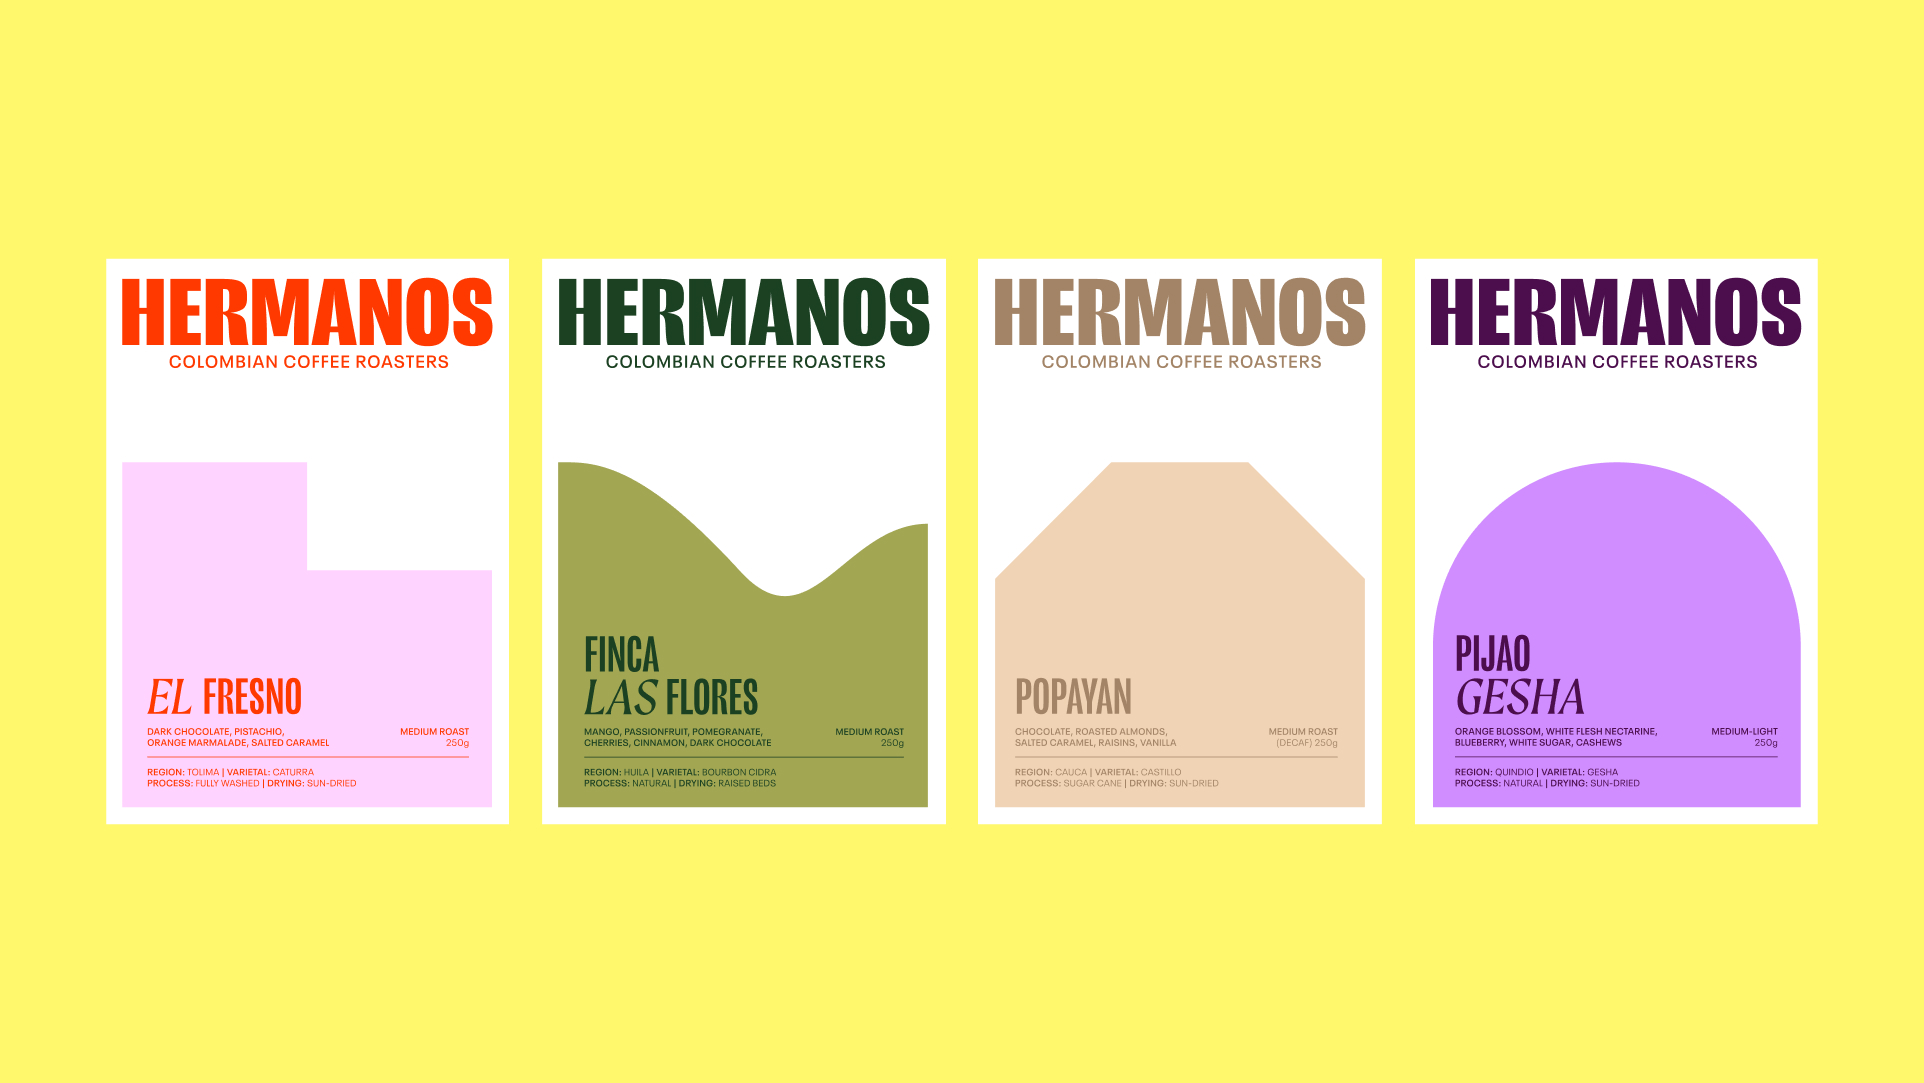 Redefining Hermanos Colombian Coffee Roasters’ Identity With Vibrant Packaging